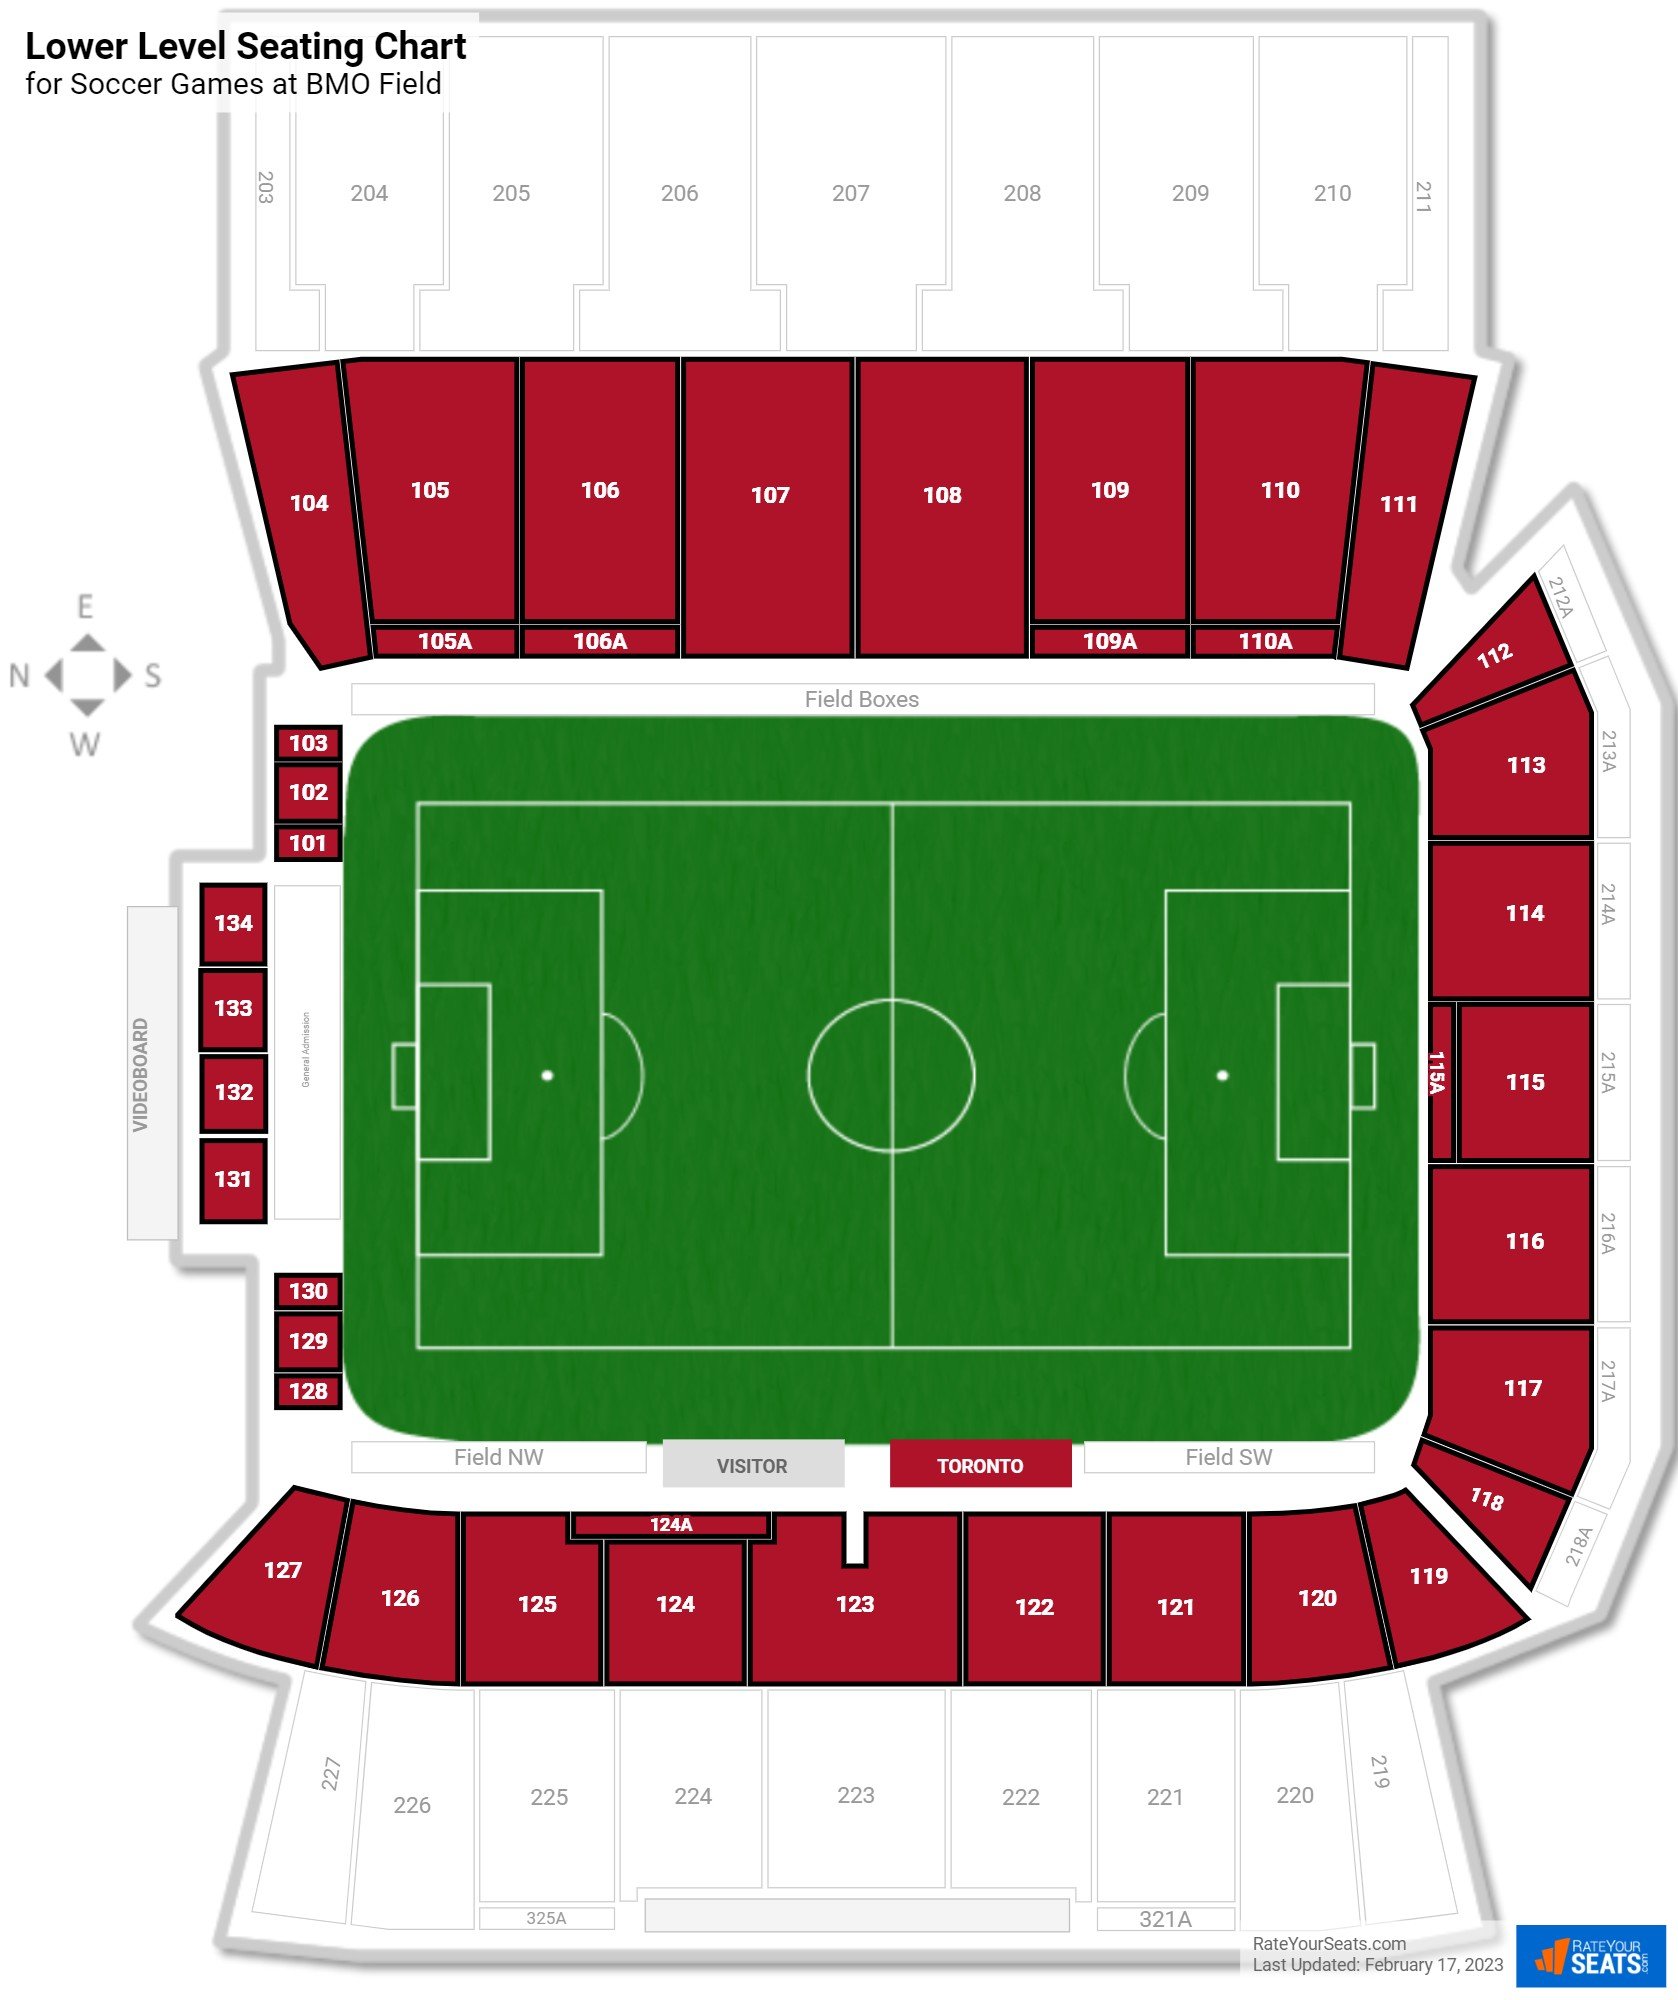 Soccer Lower Level Seating Chart at BMO Field